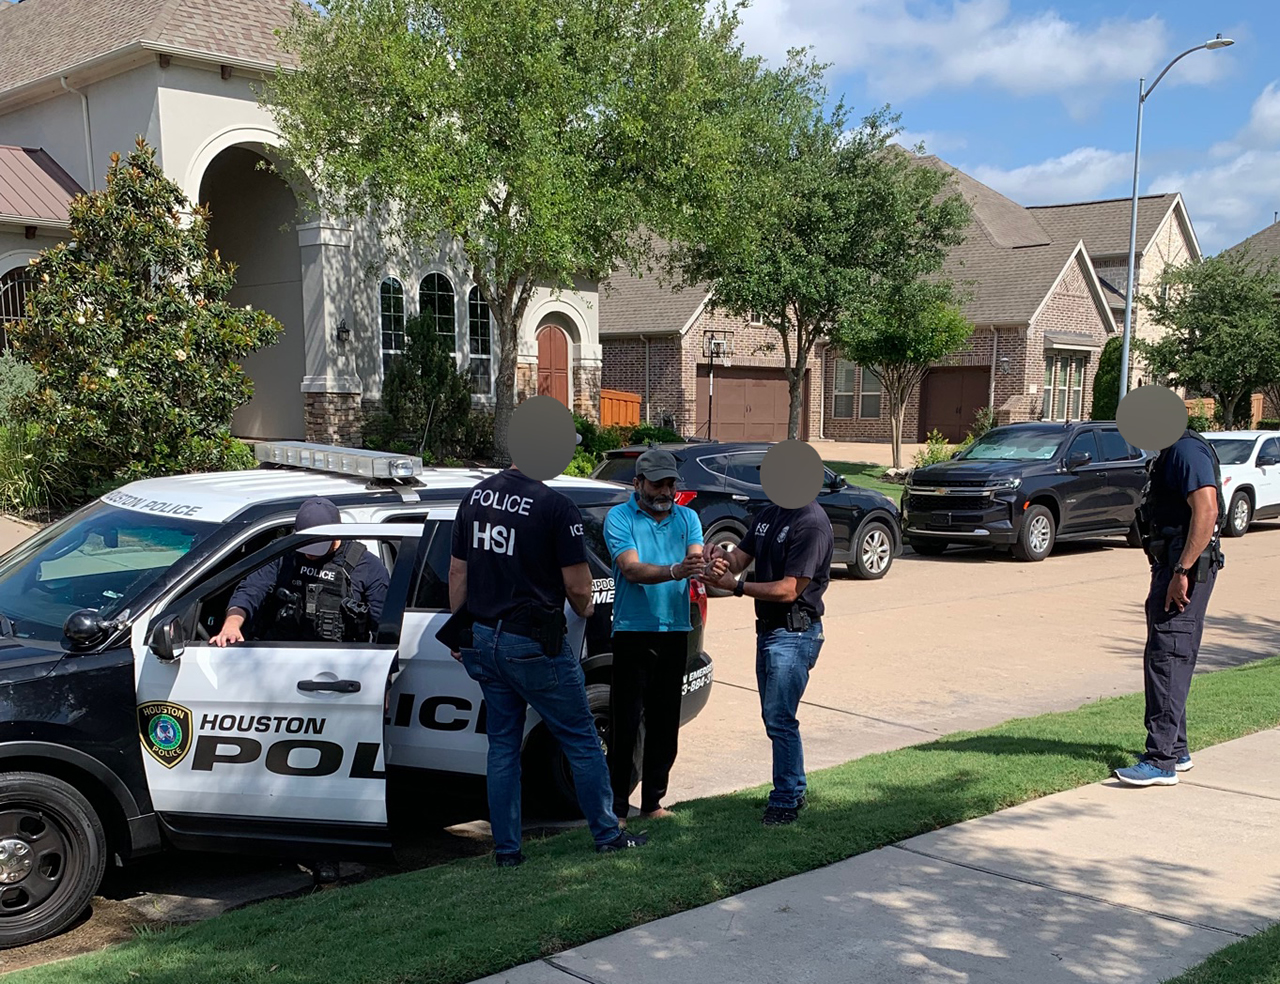 Individuals arrested were Akber Jesani, 39, and Hardin Ameena, 28, both residents of Sugarland, Texas, and Shamshuddin Dosani, 52-year-old resident of Richmond, Texas.